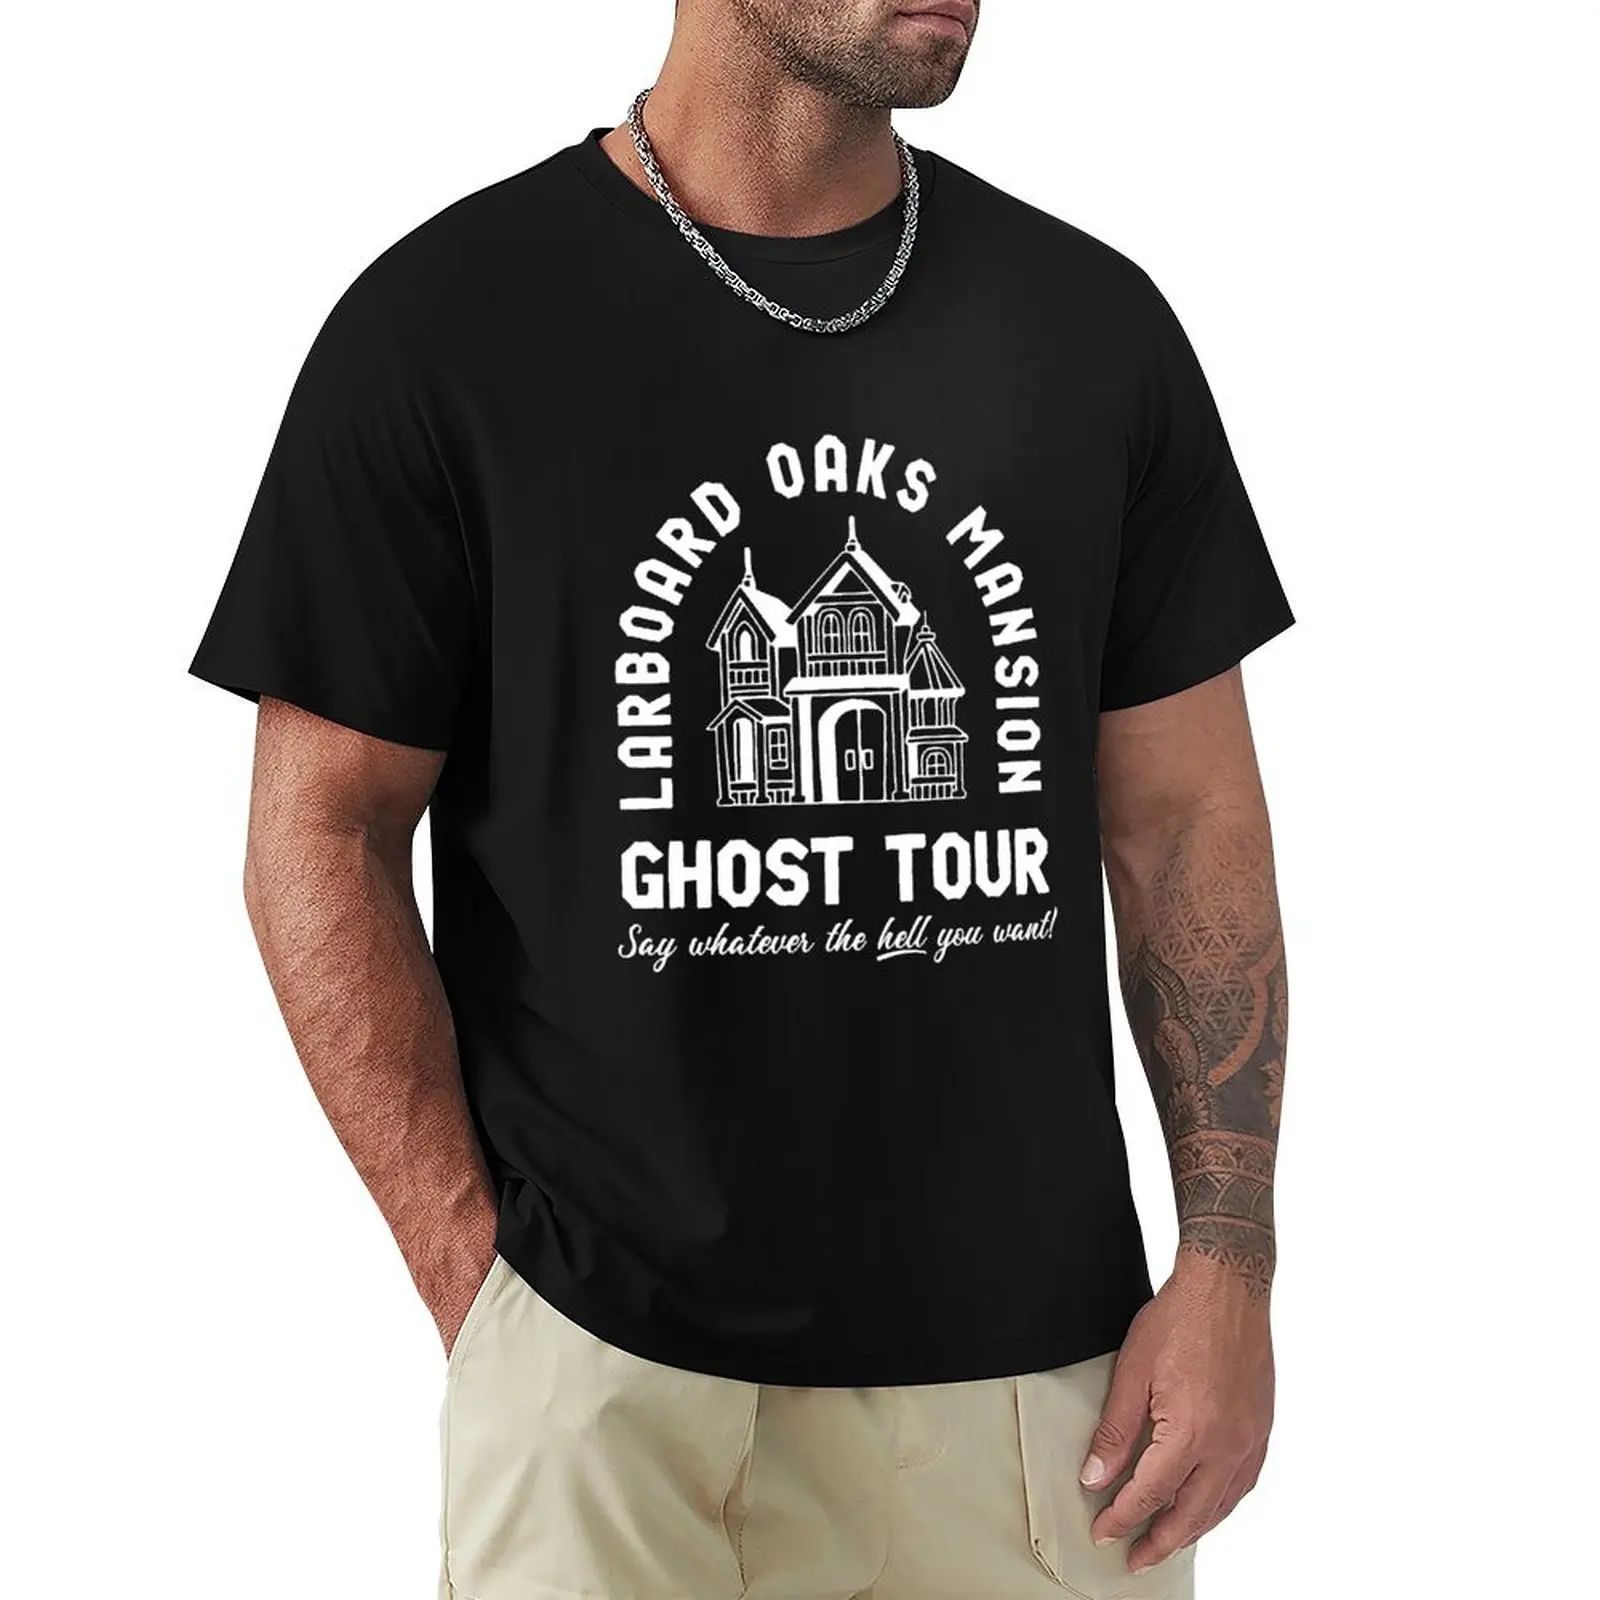 

i think you should leave ghost tour T-shirt animal prinfor boys sweat oversizeds mens graphic t-shirts pack